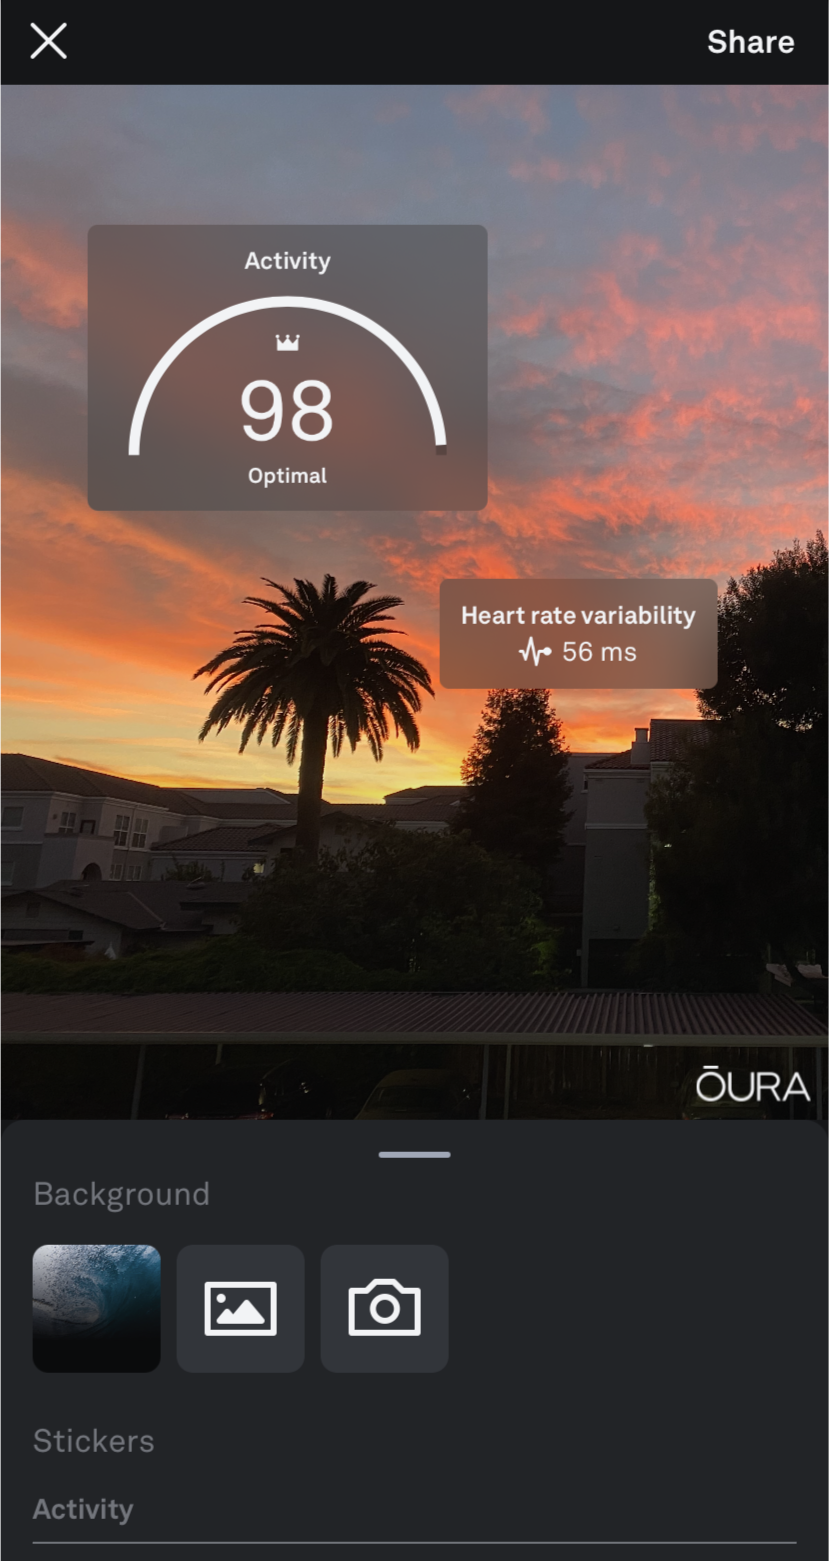 the activity score and HRV stickers against a palm tree and sunset background